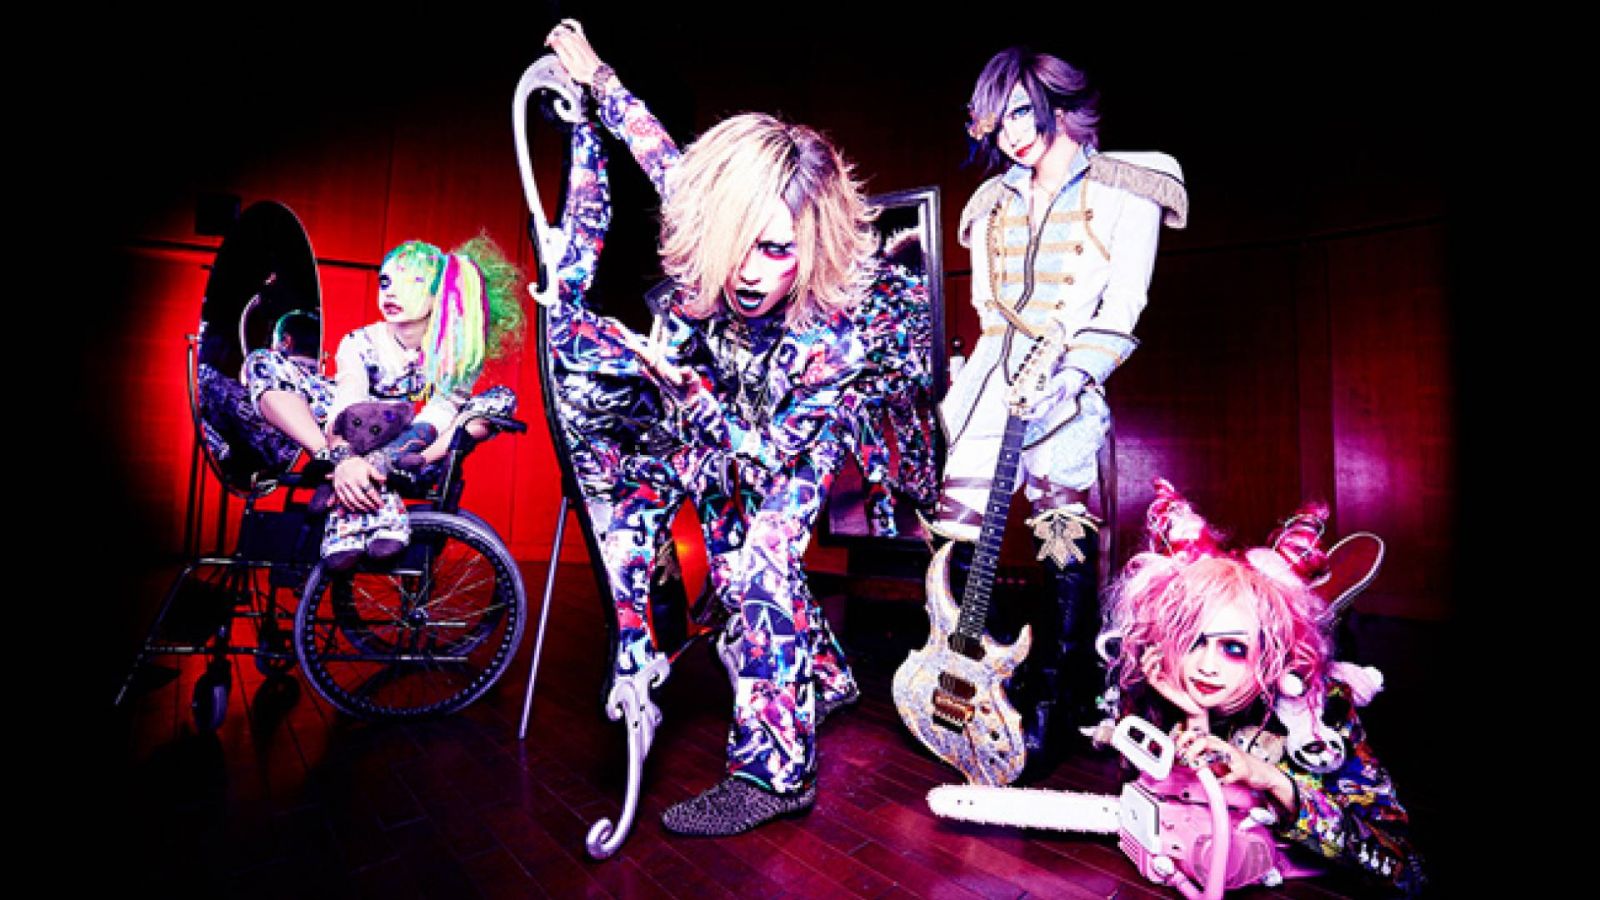 MEJIBRAY anuncia dois singles © White Side Group. All Rights Reserved.